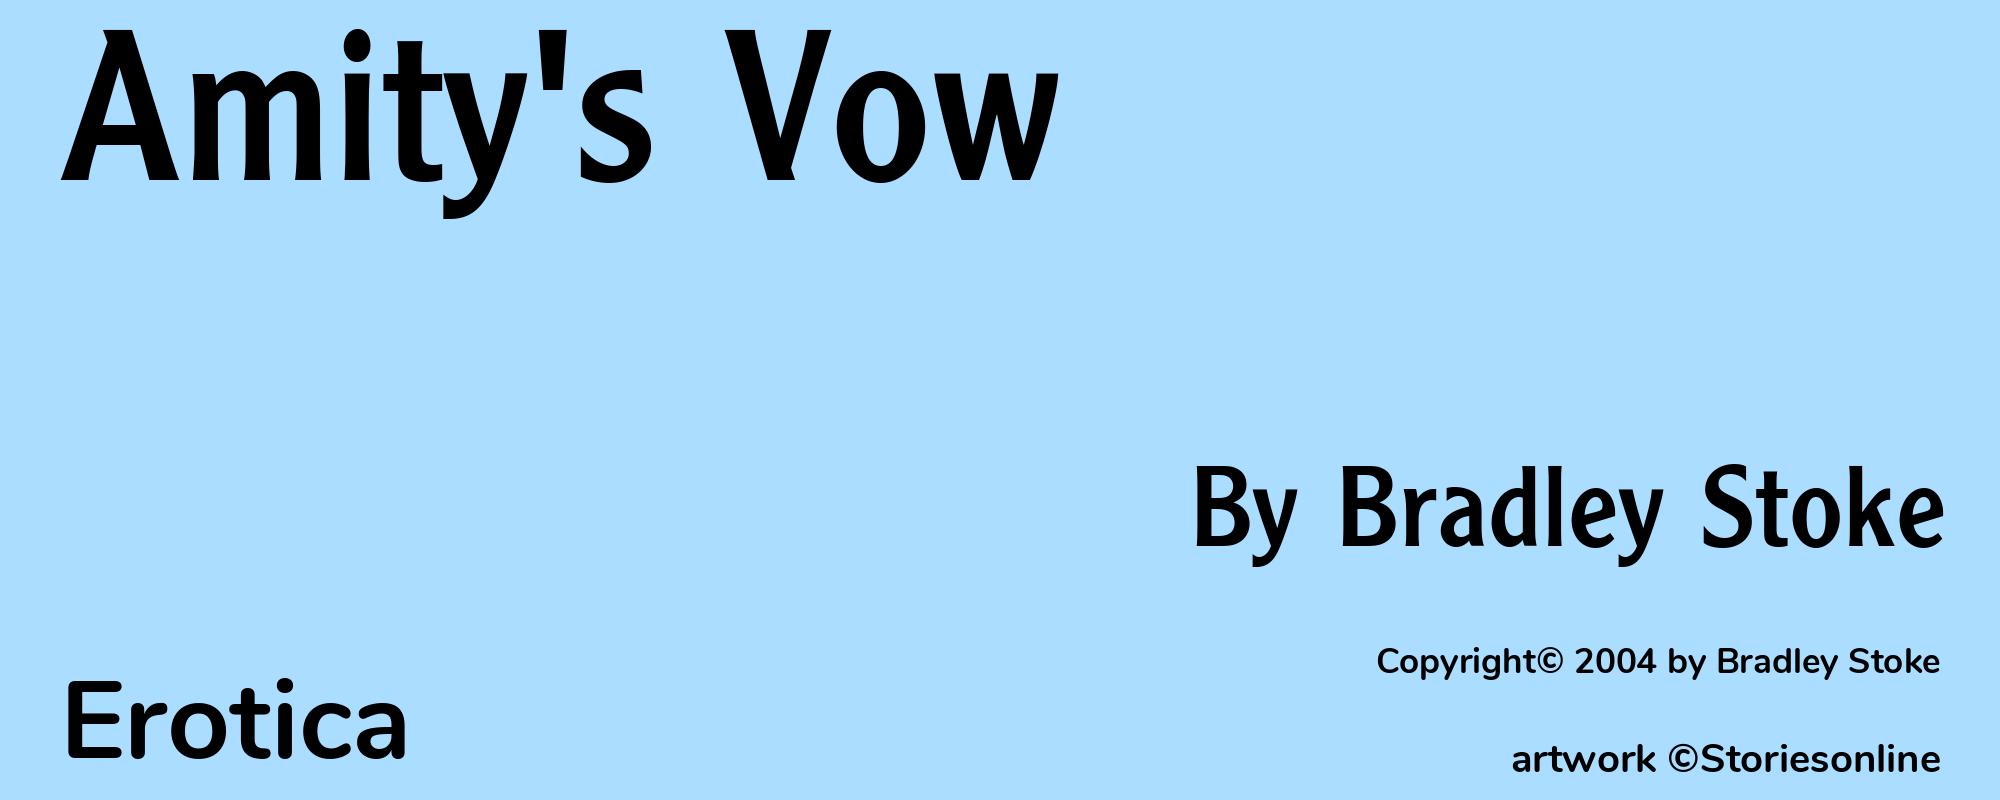 Amity's Vow - Cover